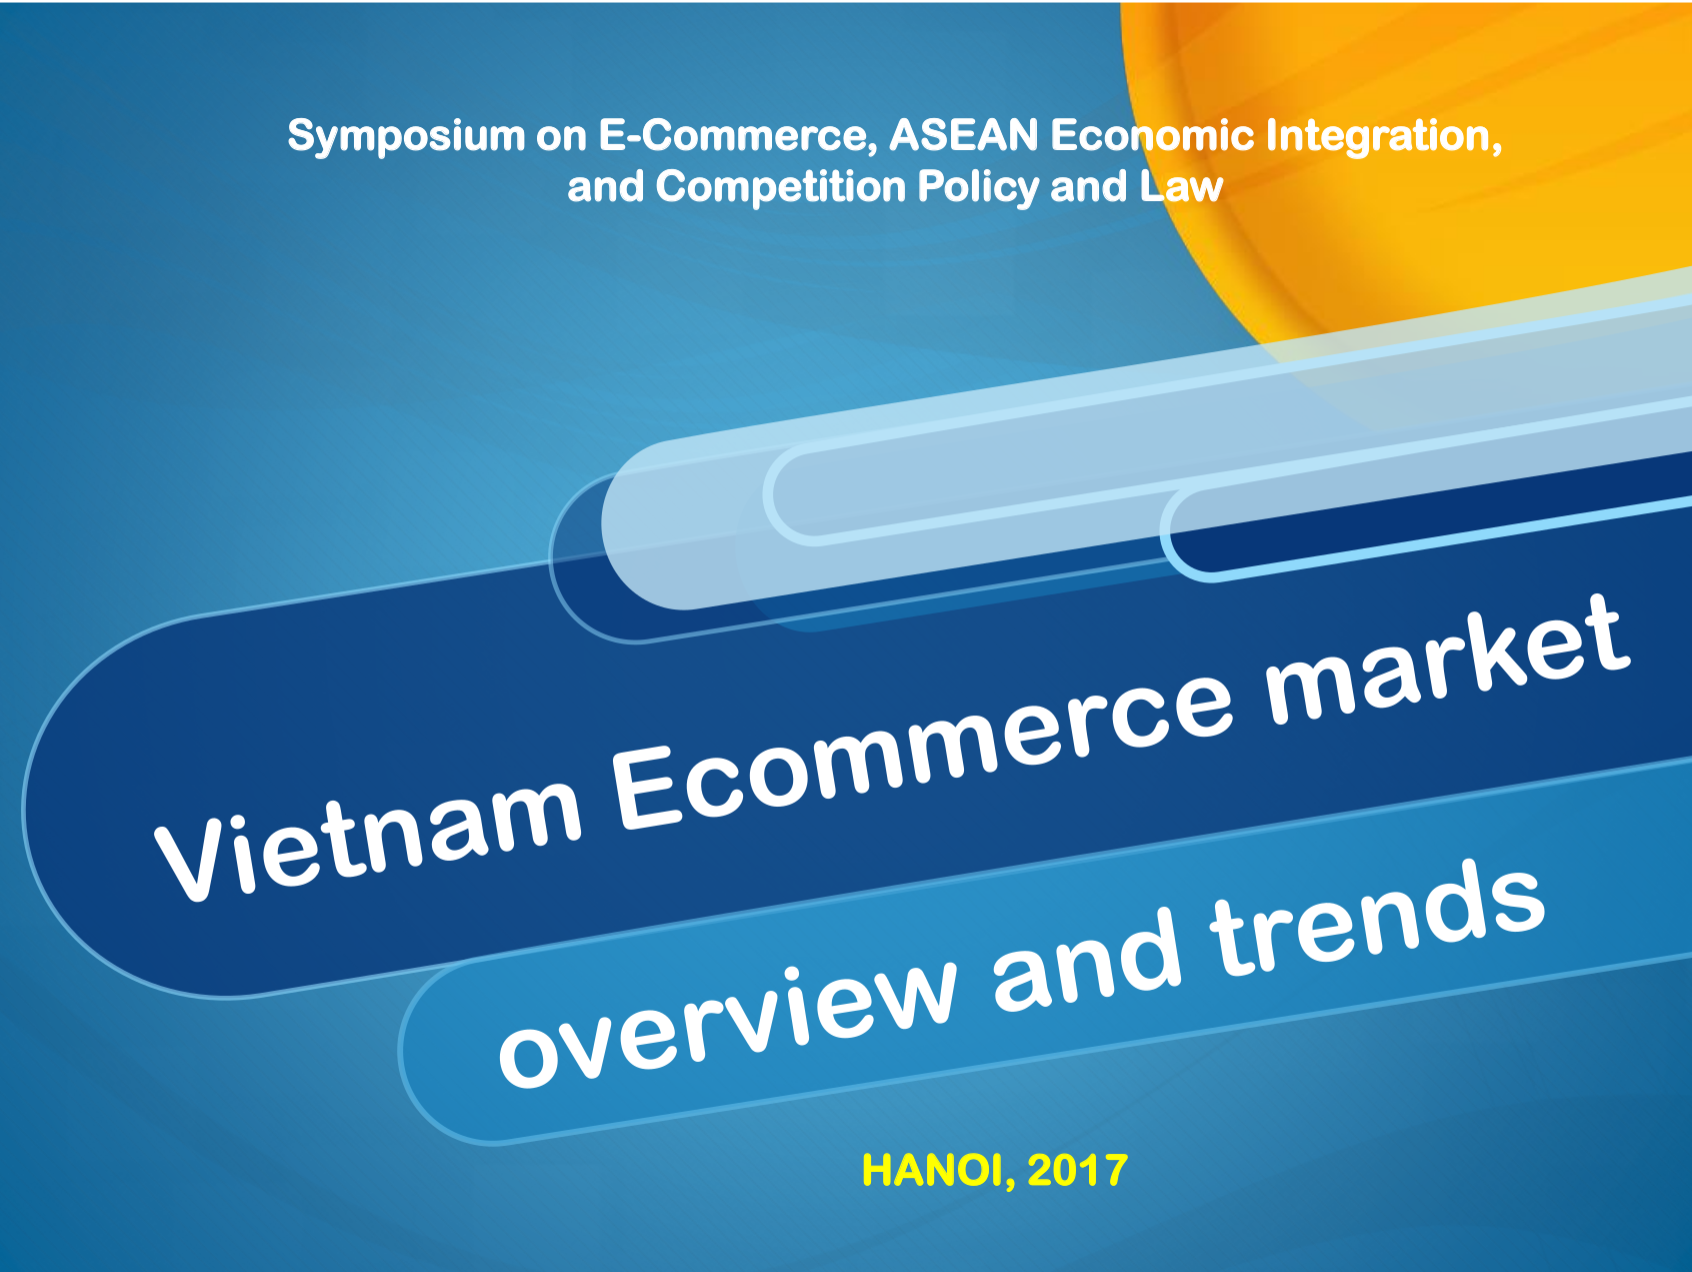 Vietnam E-Commerce Market Overview and Trends